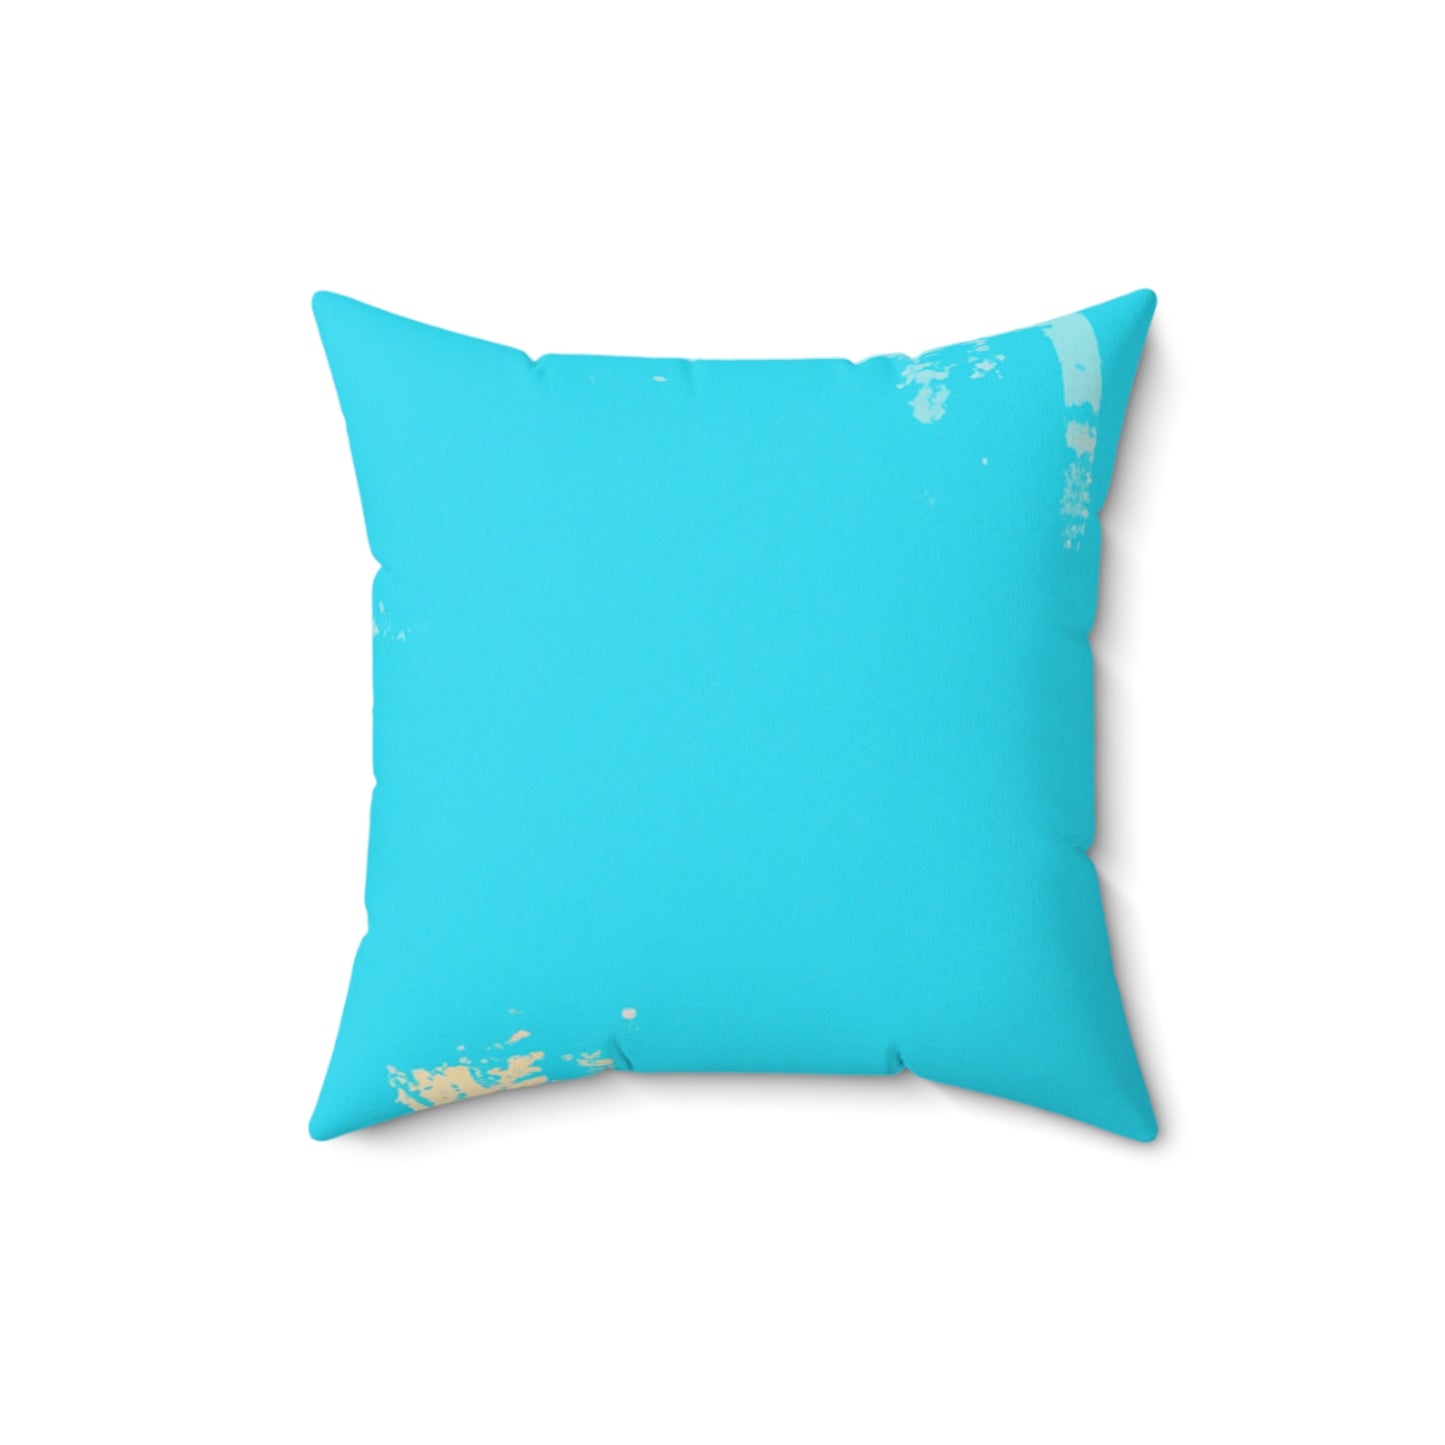 "A Breezy Skyscape: A Combination of Tradition and Modernity" - The Alien Square Pillow